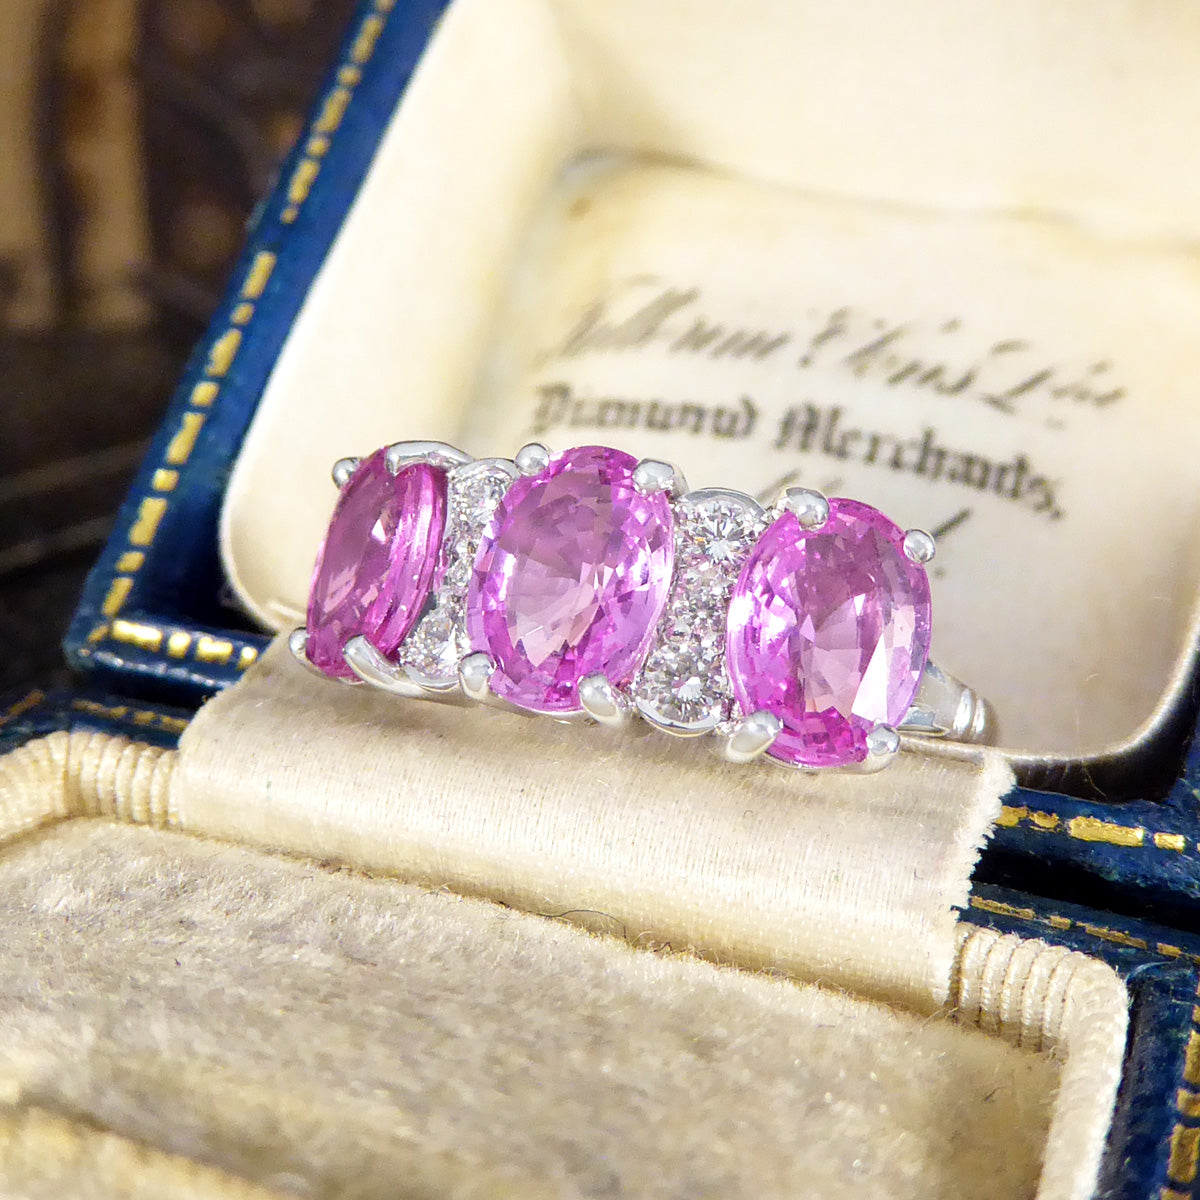 Pink Sapphire Three Stone Ring with Diamond Spacers in 18ct White Gold